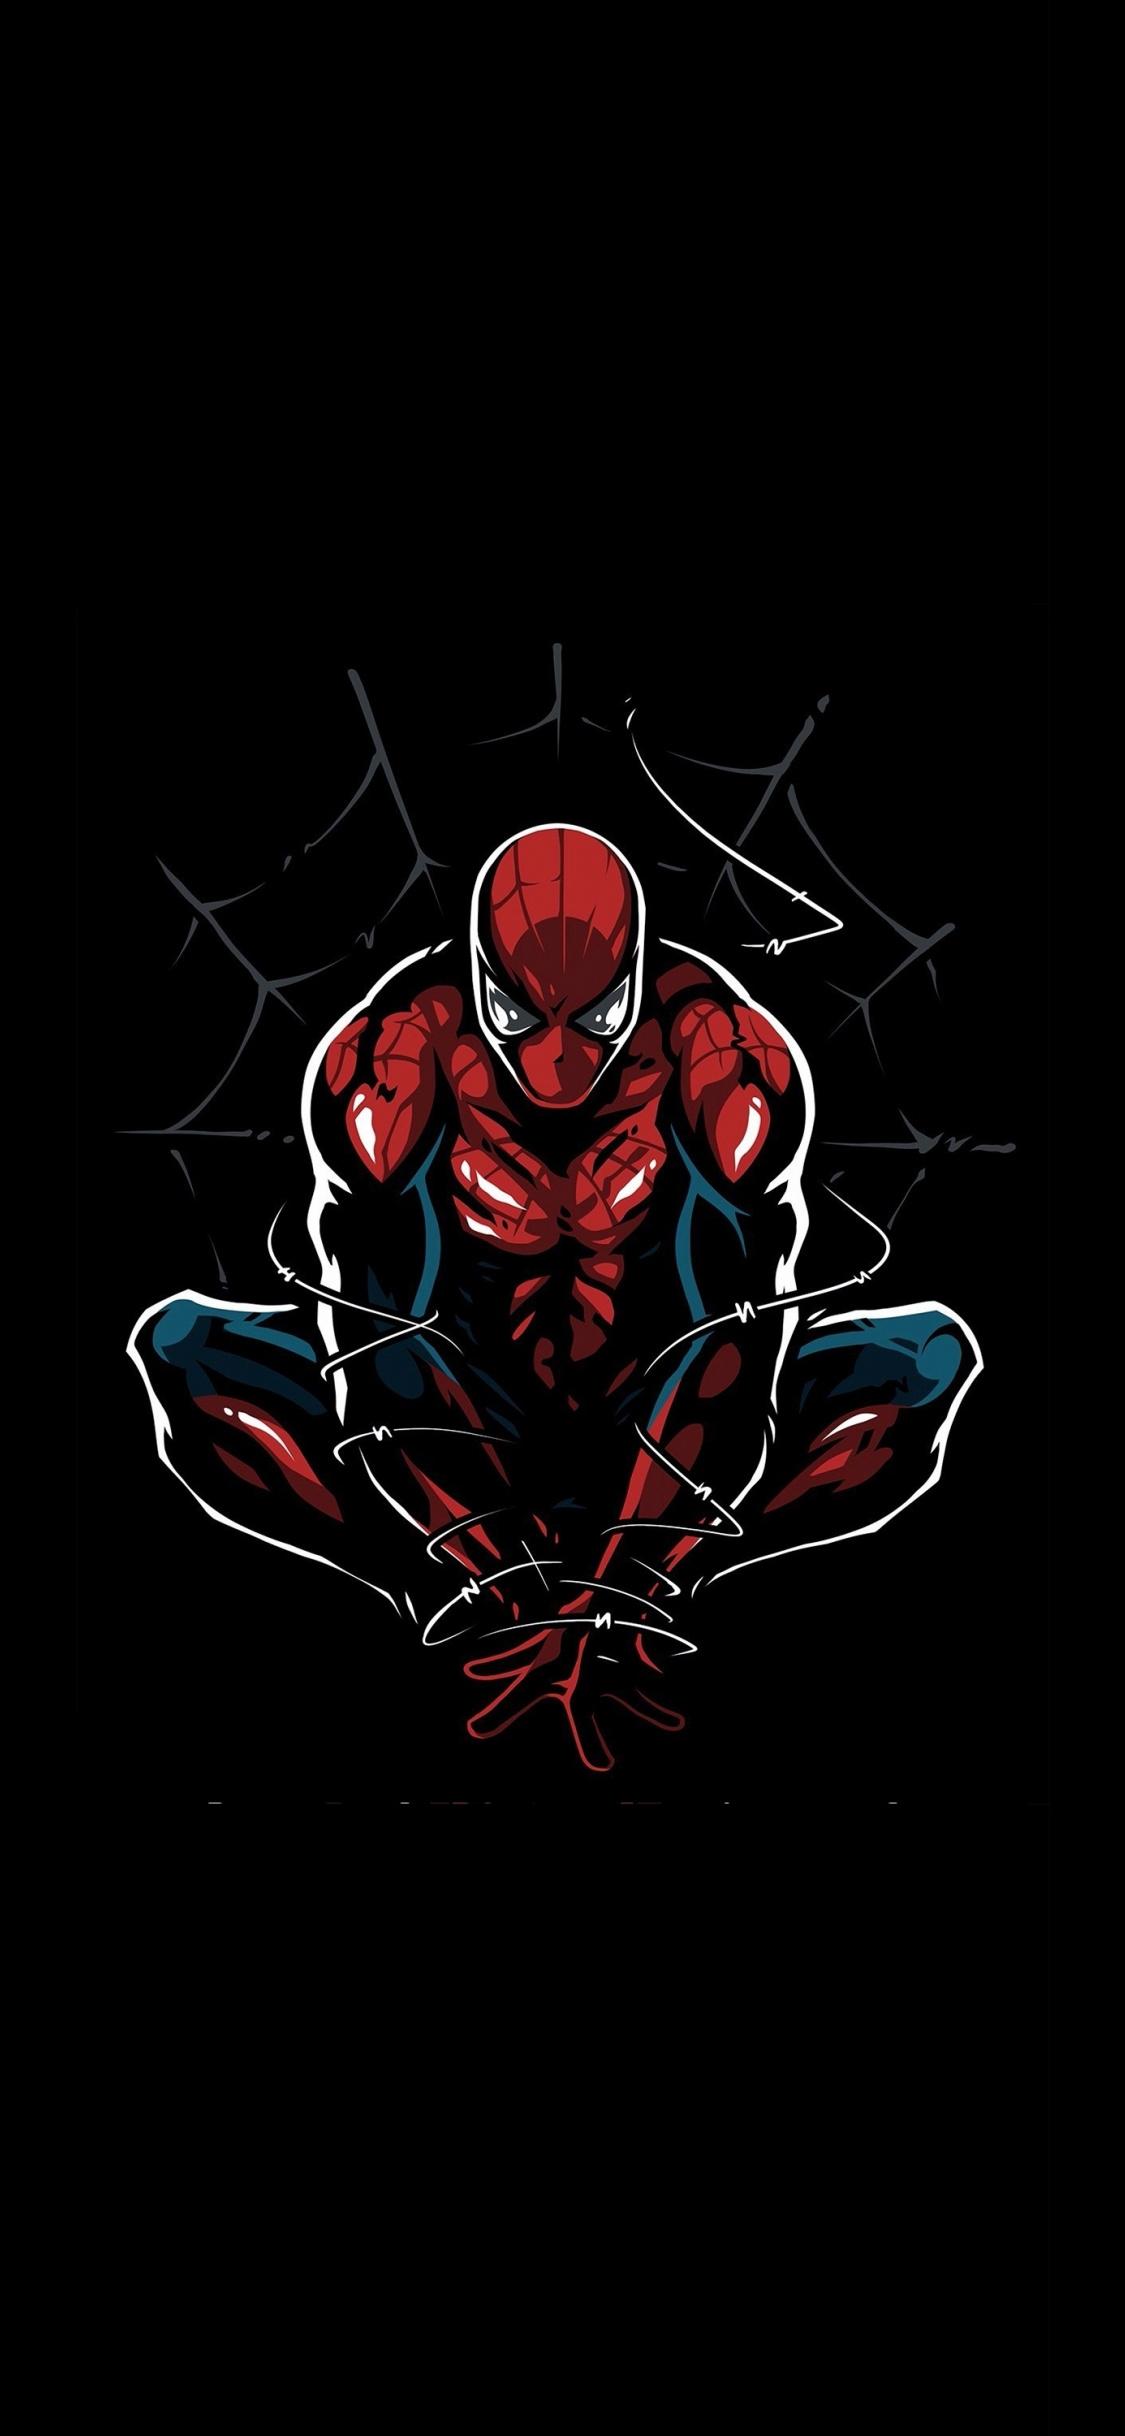 Spider 2023 iPhone Wallpapers - Wallpaper Cave